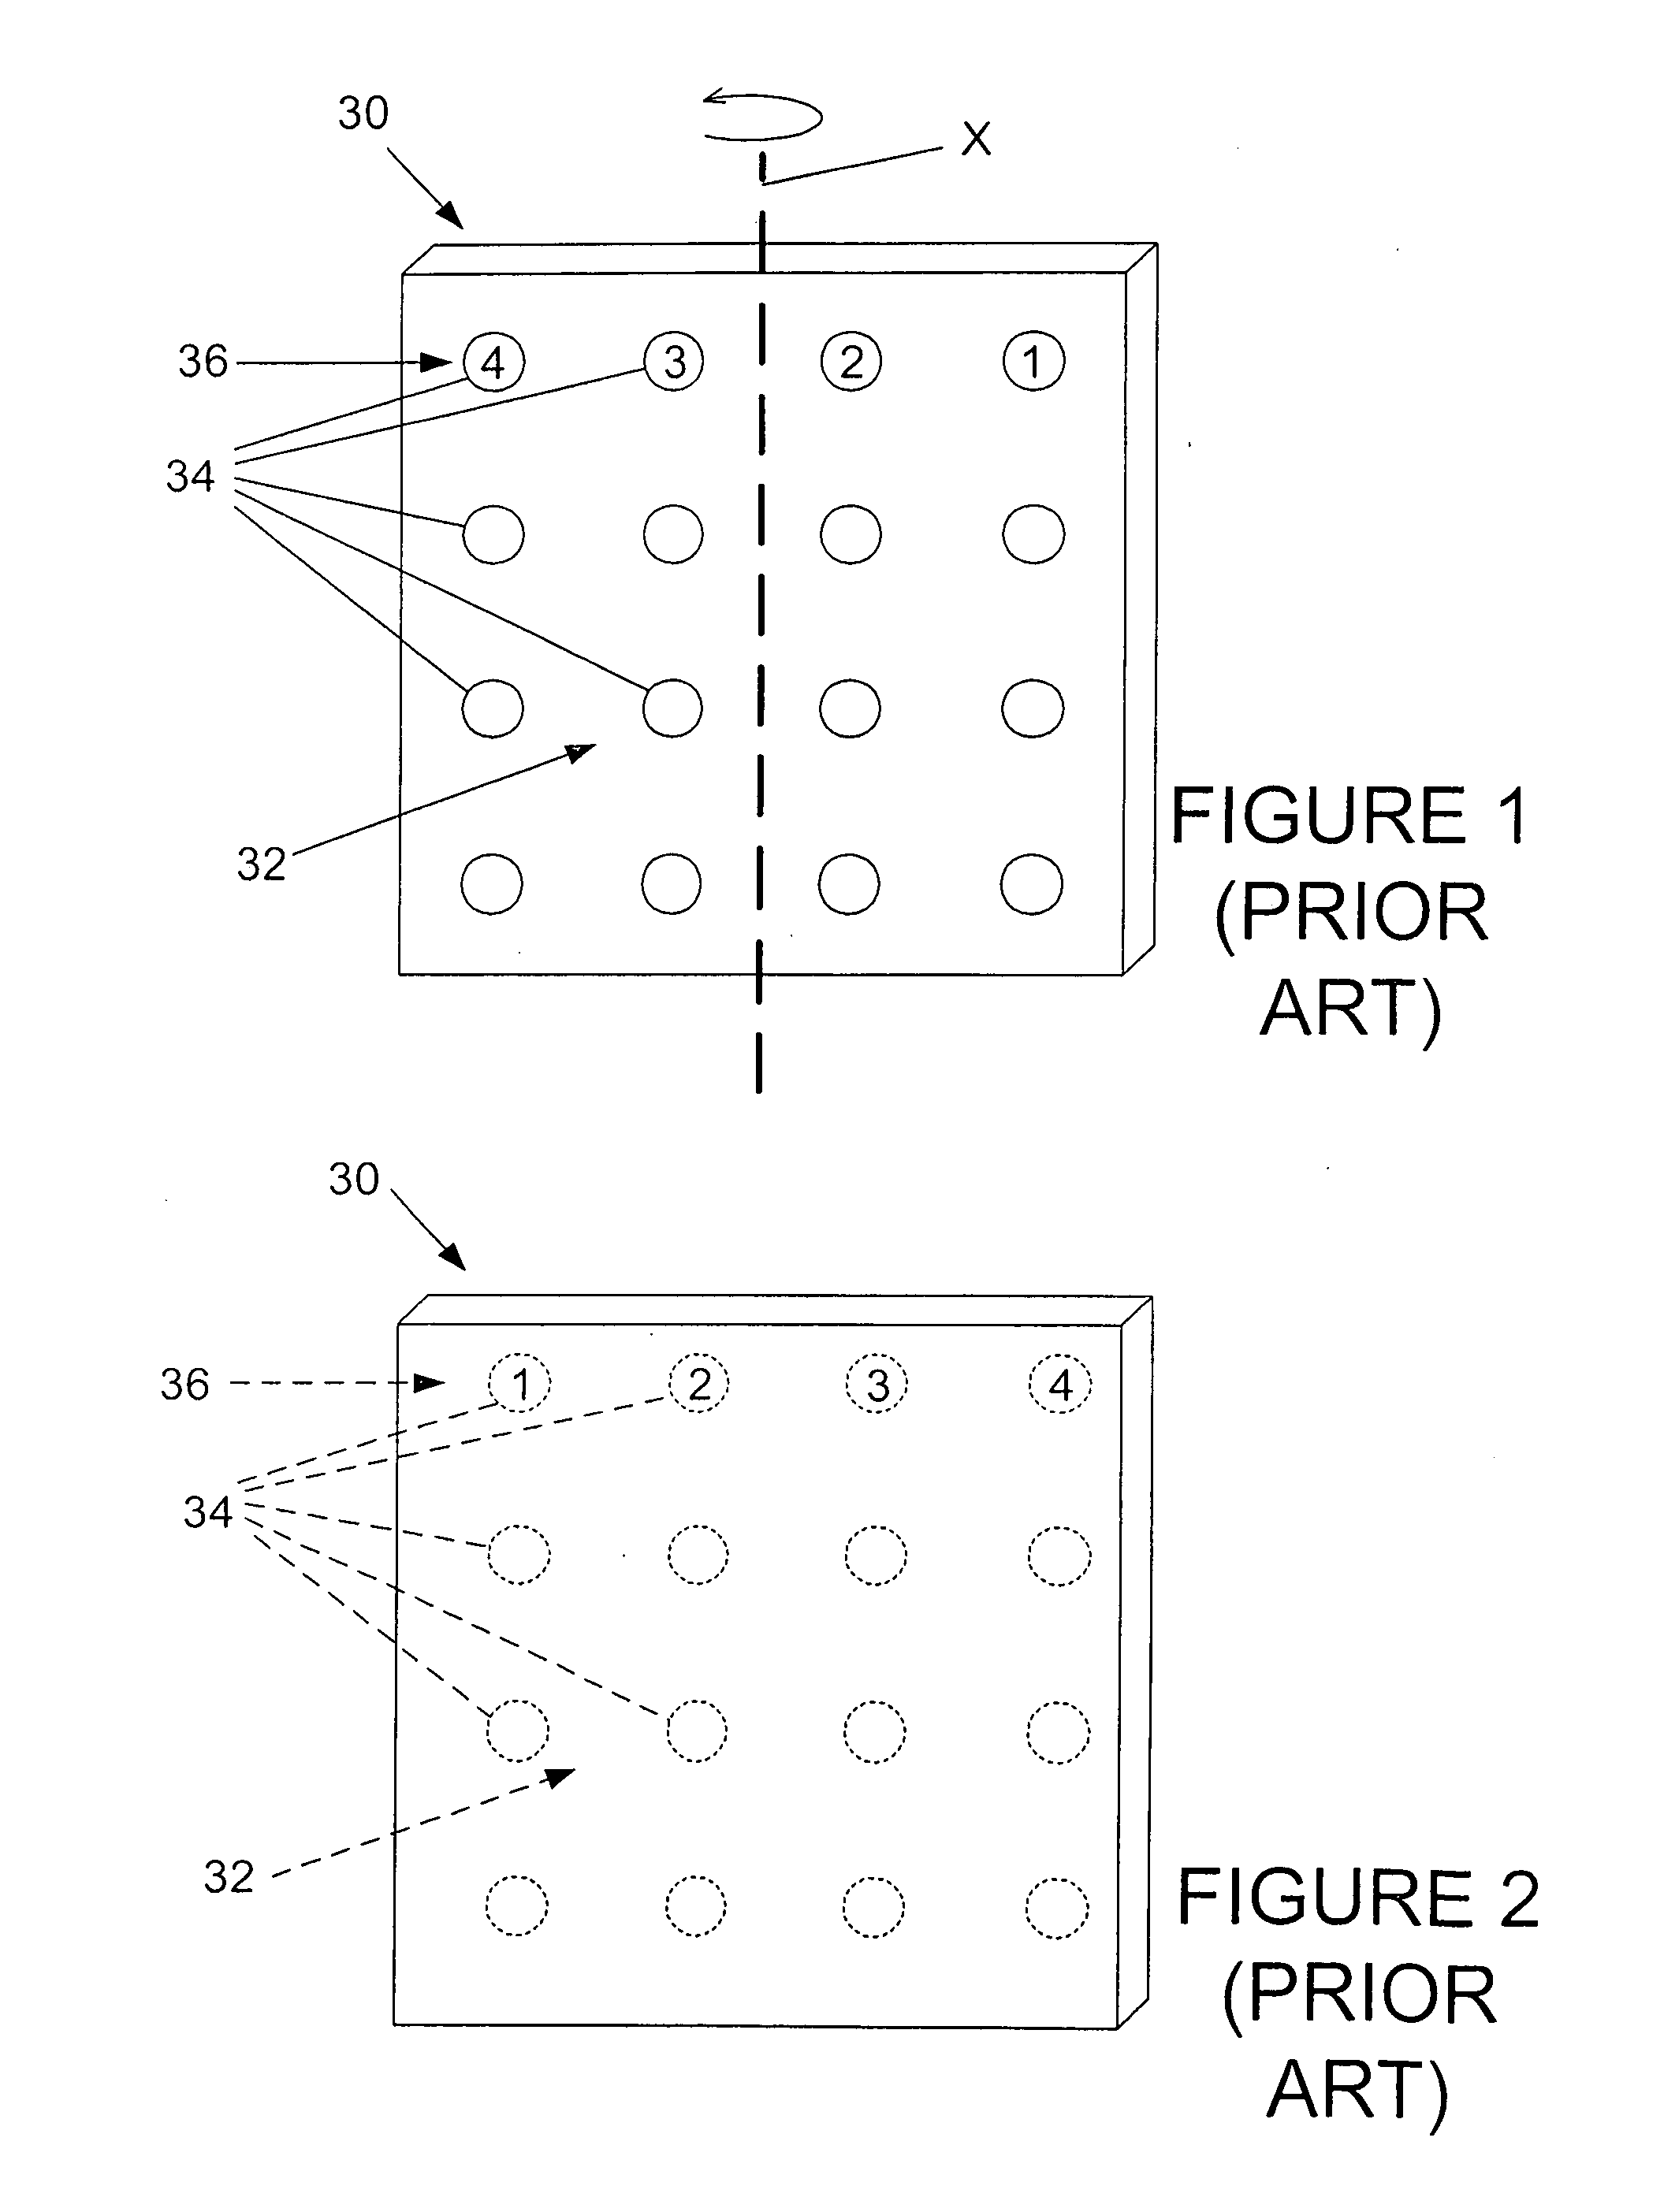 Connections for electronic devices on double-sided circuit board